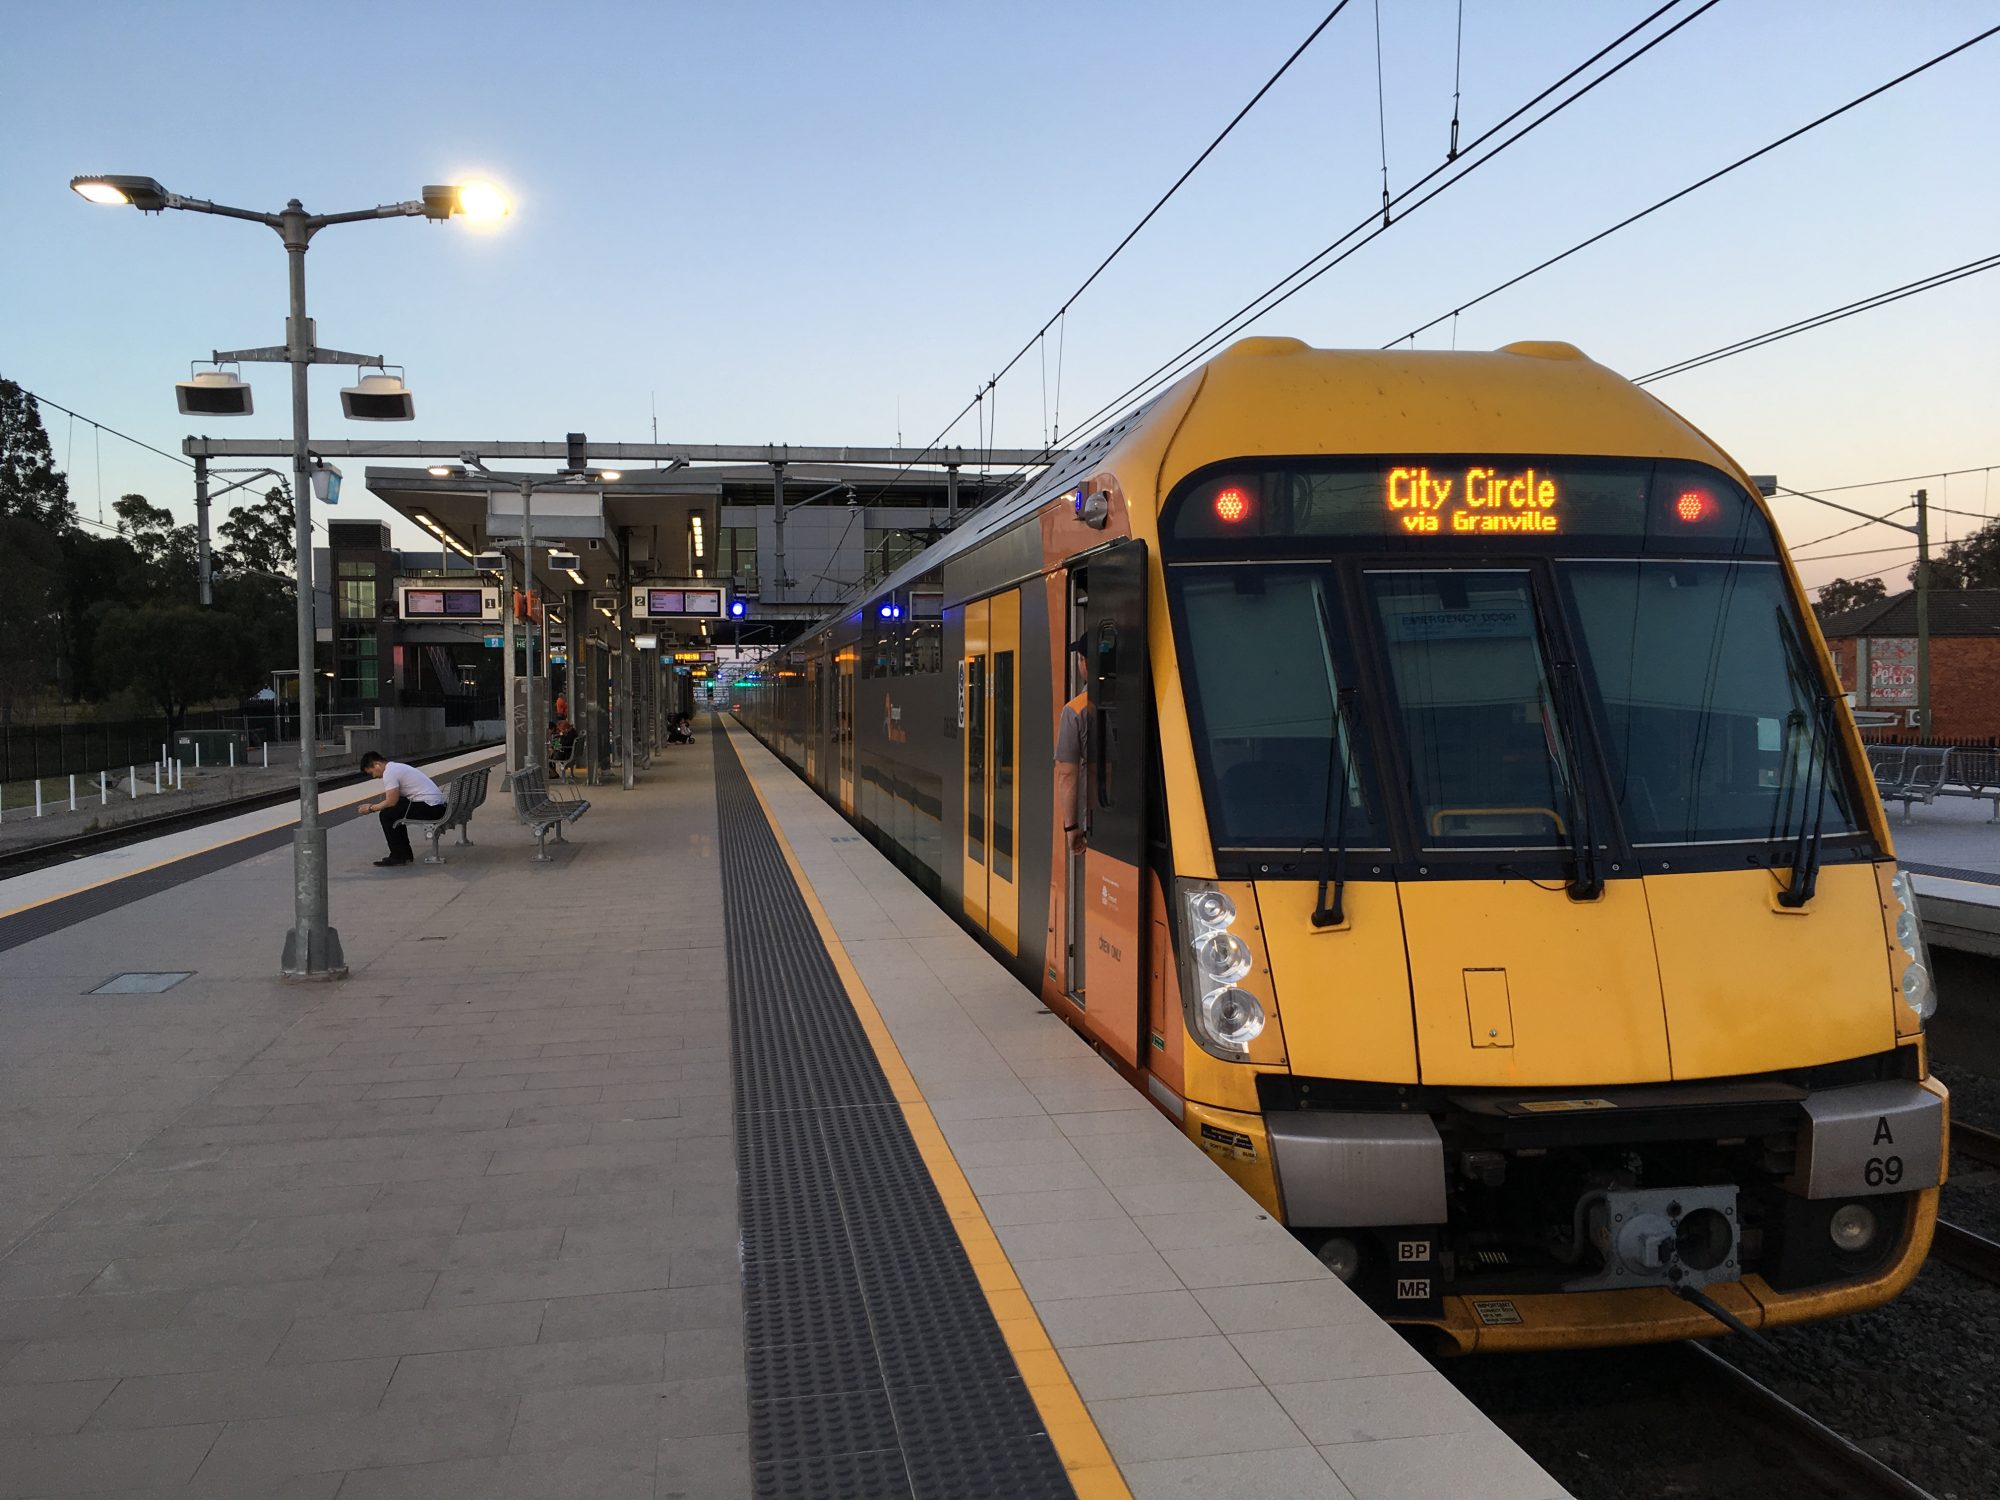 sydney-trains-to-accelerate-driver-recruitment-following-major-network-disruptions-rail-uk